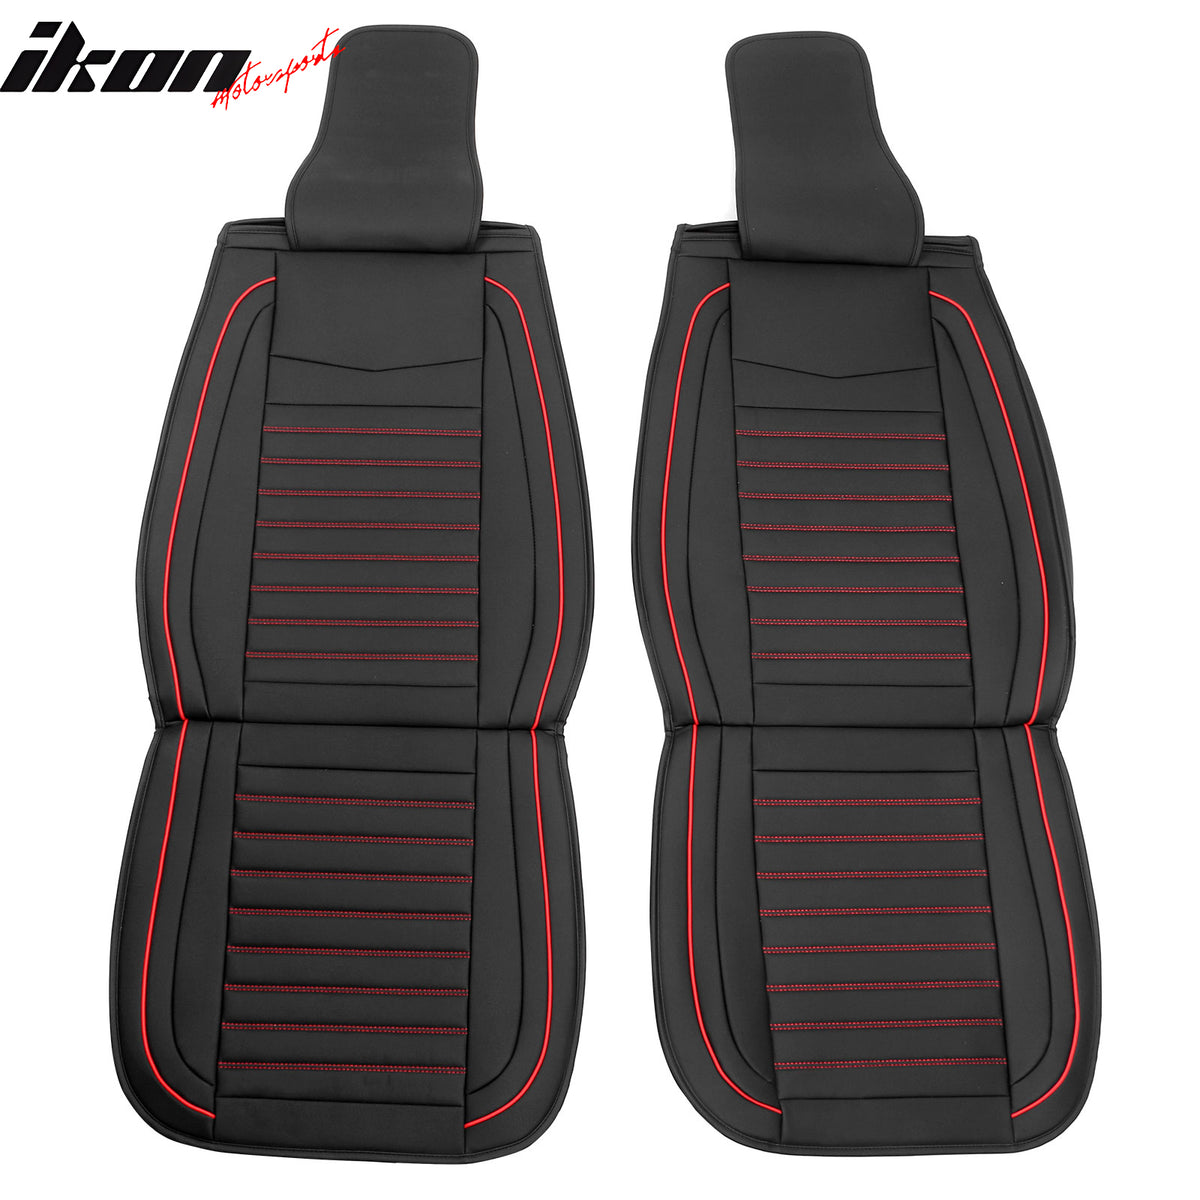 Universal Black & Red Stitching Car Seat Covers PU Leather - 02 Style (Front)